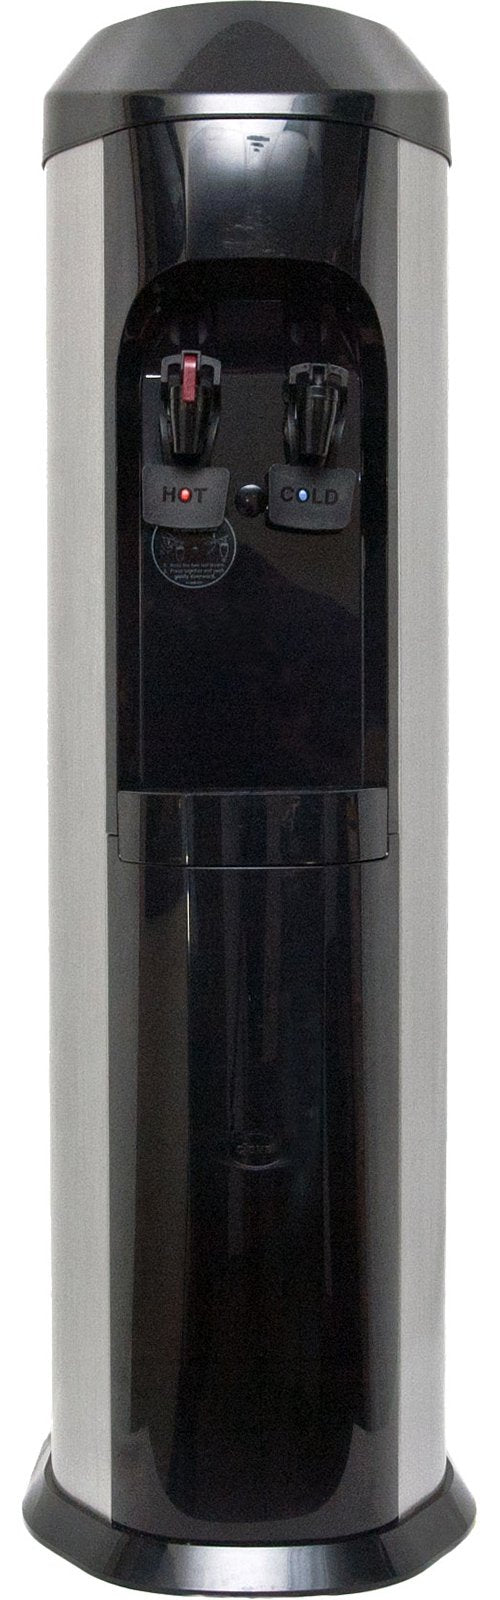 Clover D14A Hot and Cold Bottleless Water Dispenser with Install Kit and Filter